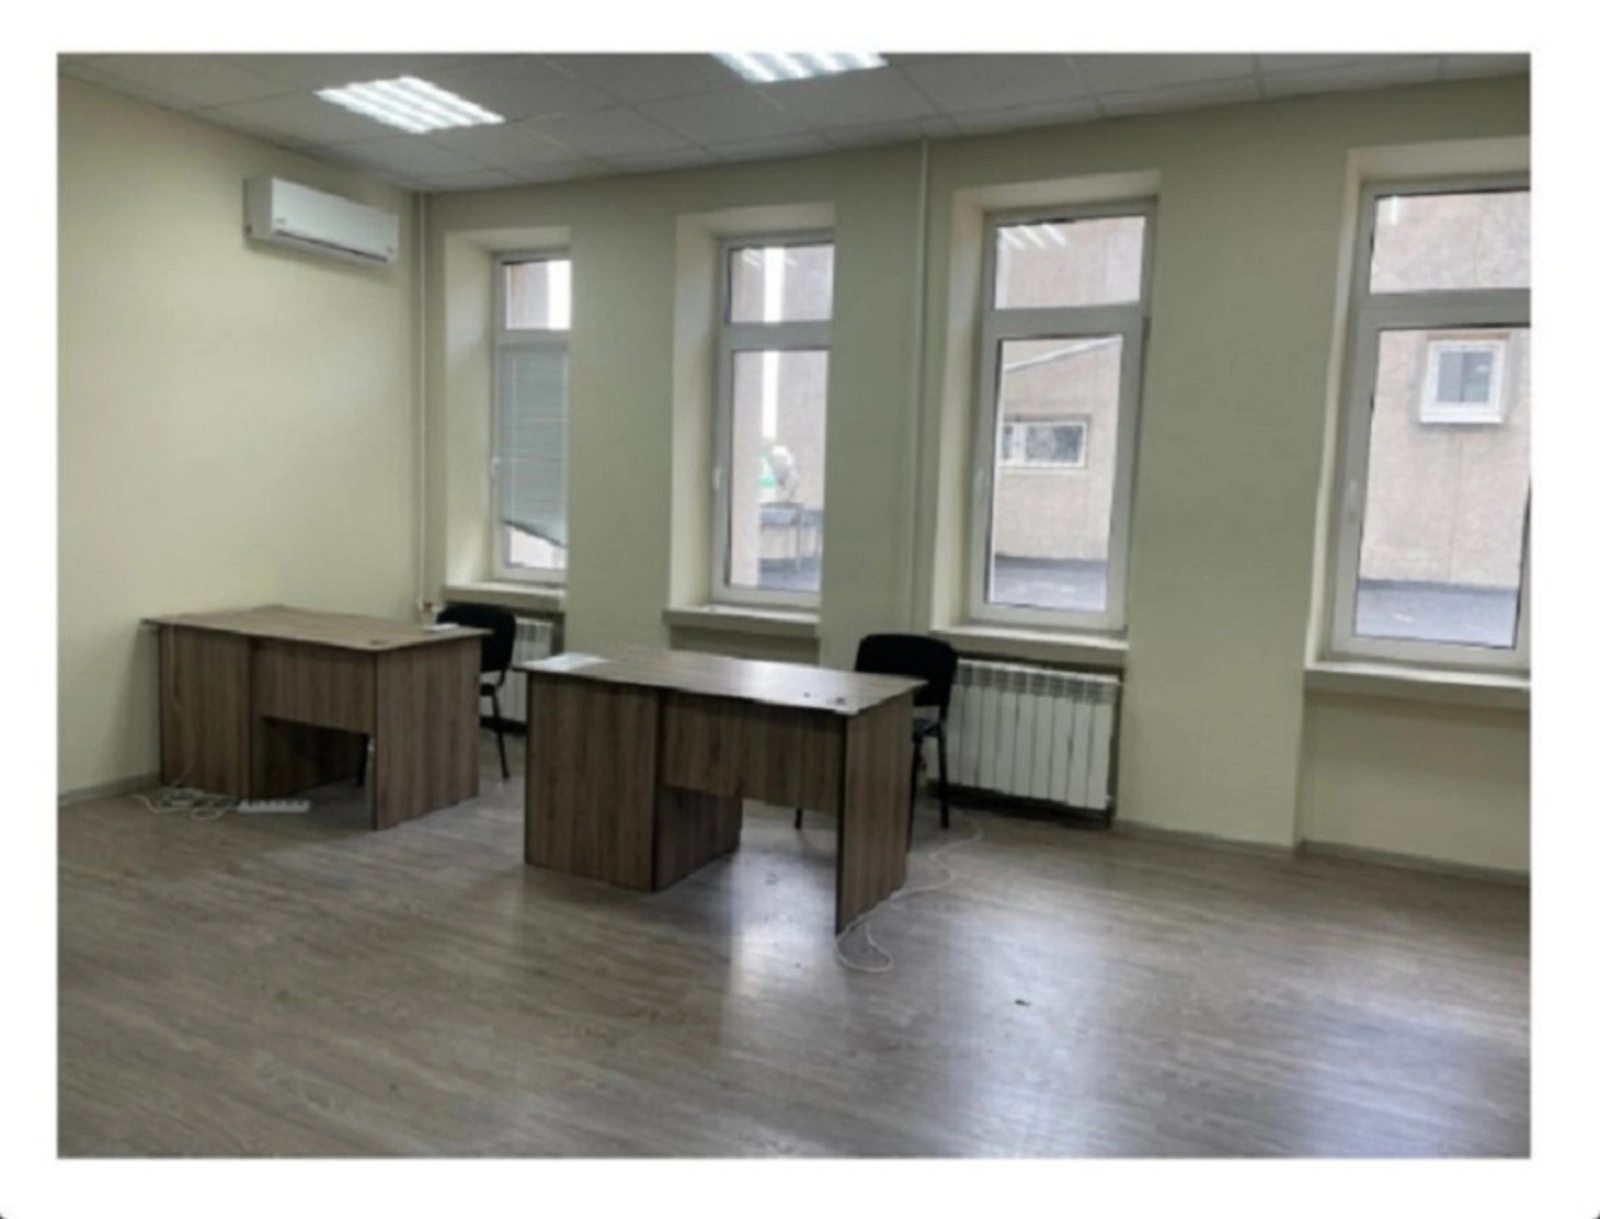 Real estate for sale for commercial purposes. 33 m², 8th floor/10 floors. Torhovytsya vul., Ternopil. 